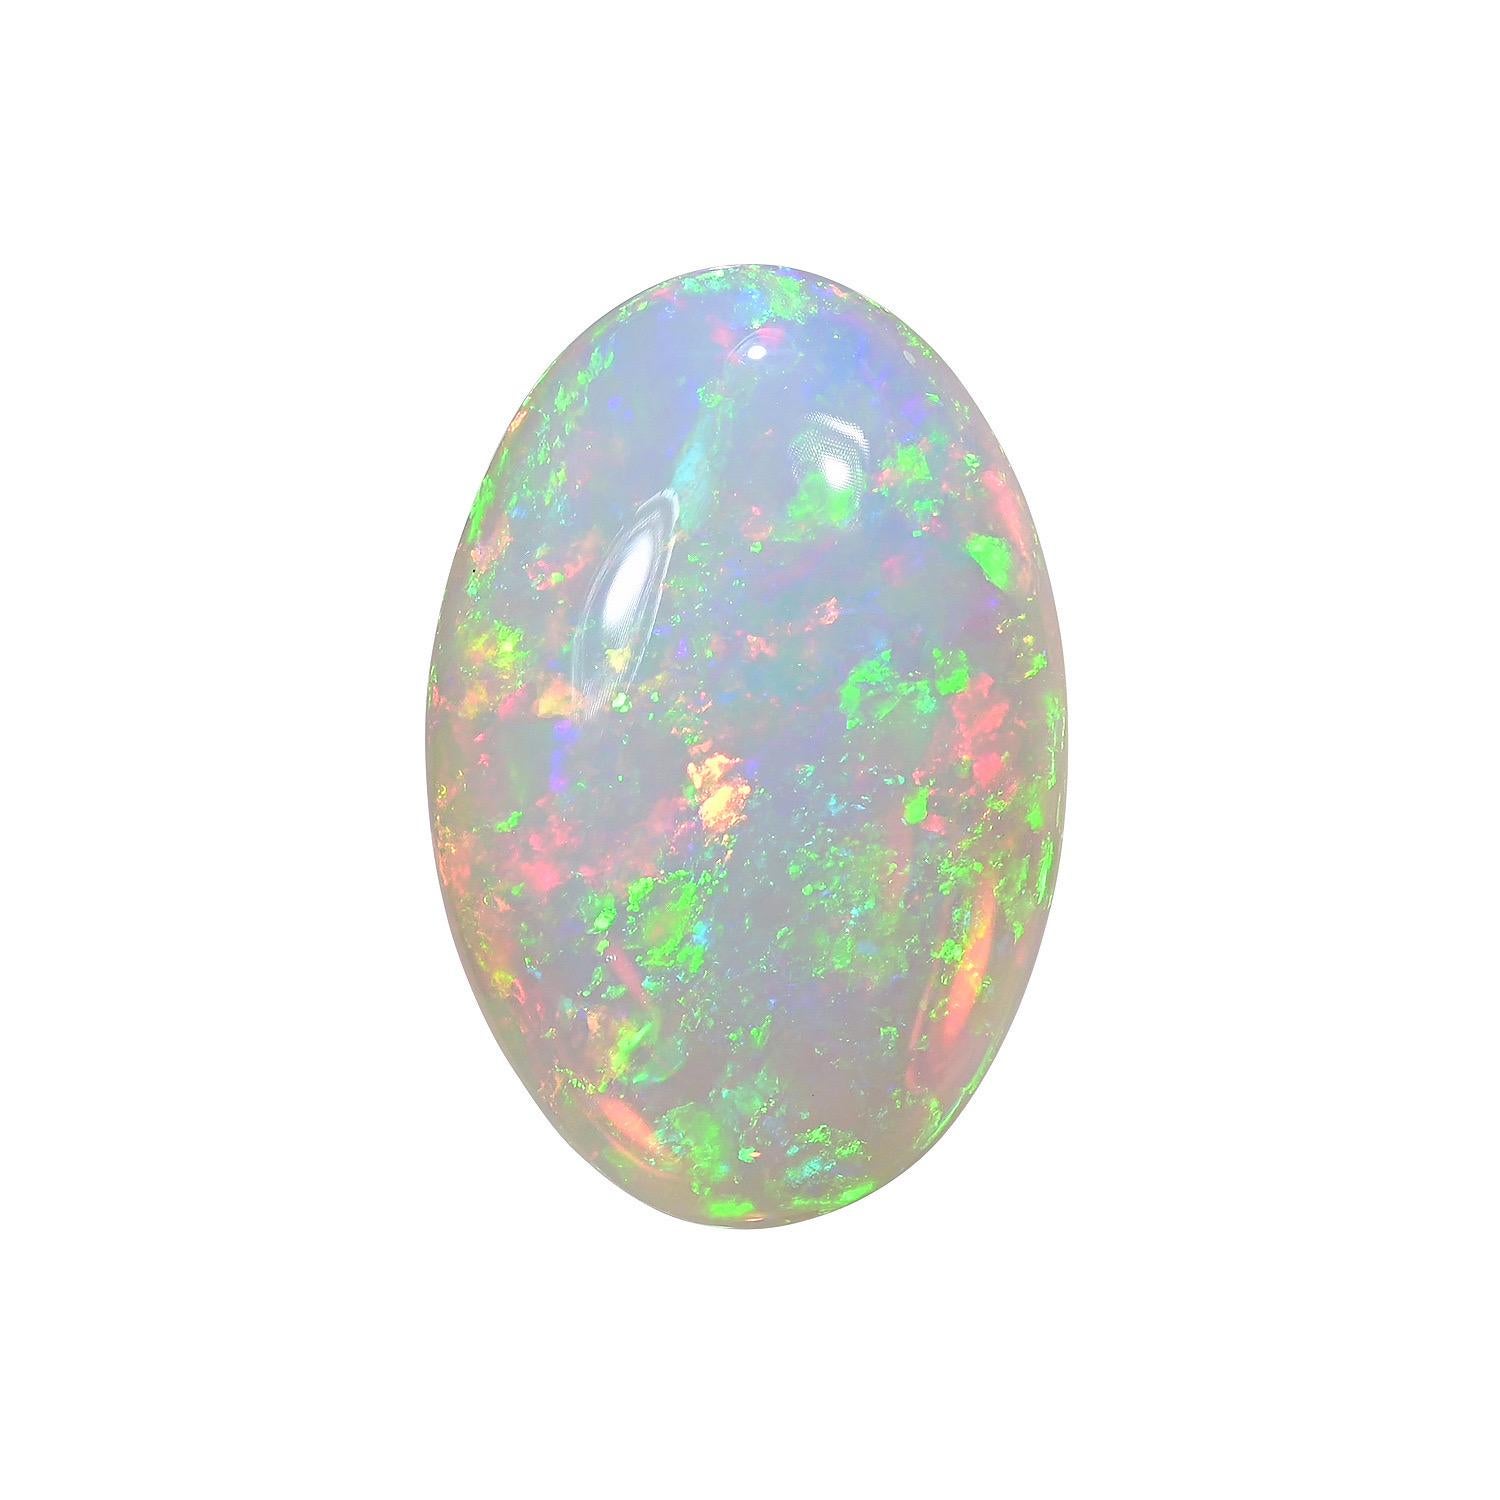 Natural 22.20 carat oval Ethiopian Opal loose gemstone, offered unmounted to someone special.
Returns are accepted and paid by us within 7 days of delivery.
We offer supreme custom jewelry work upon request. Please contact us for more details.
For